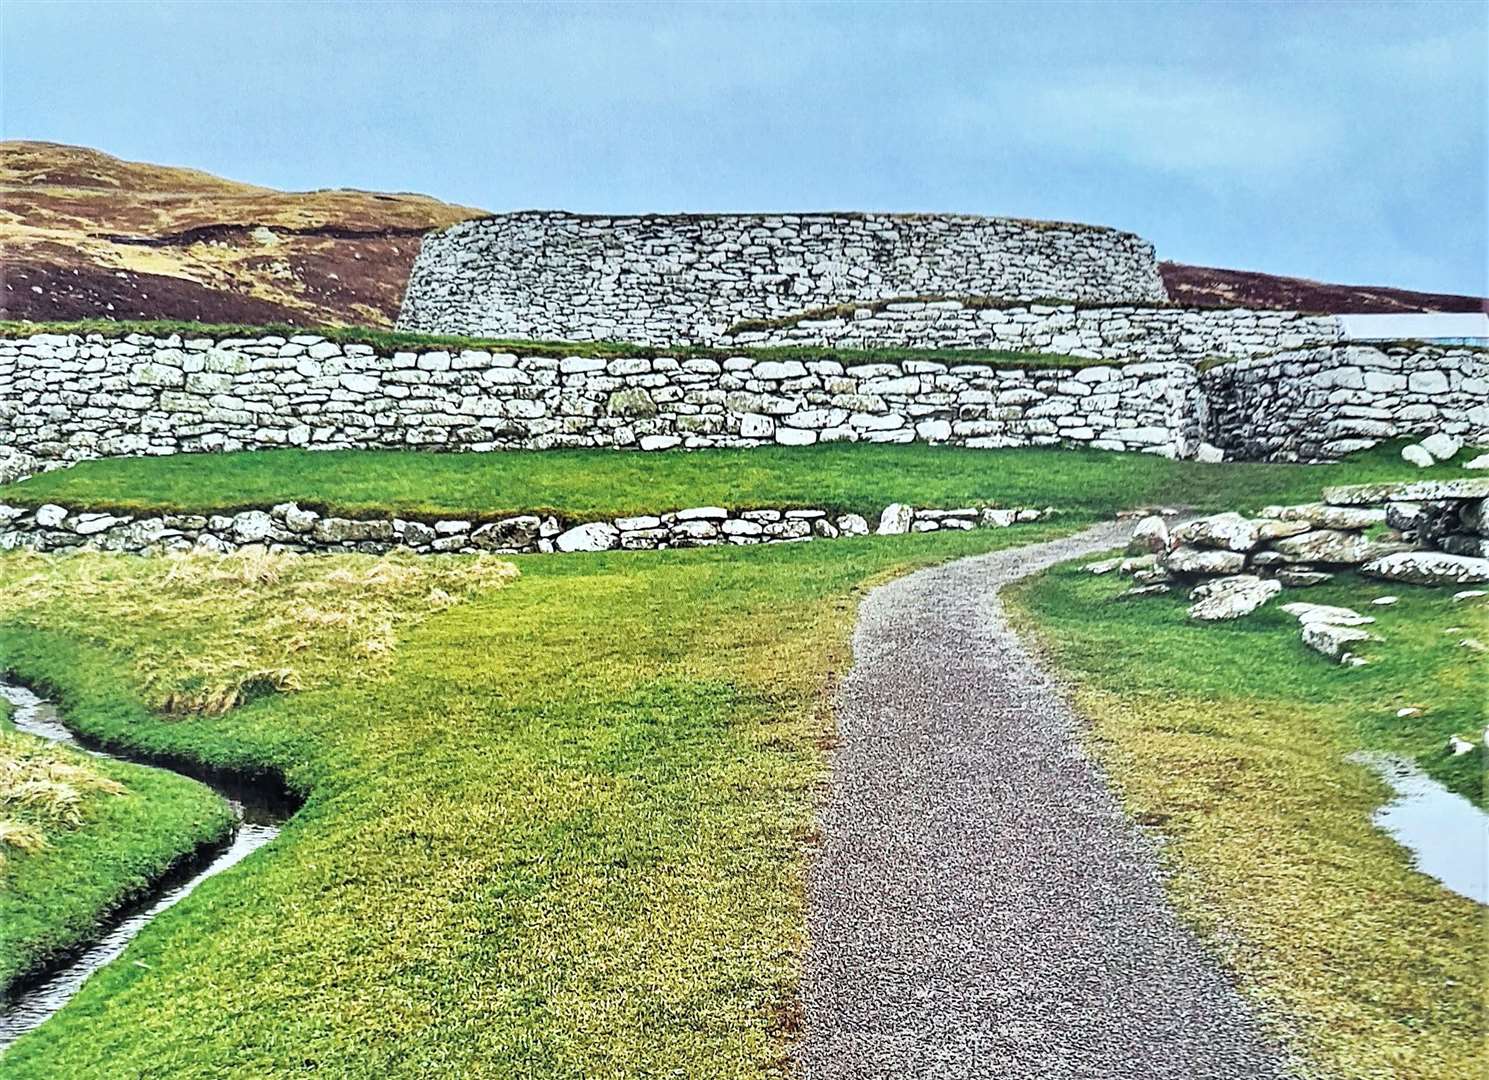 The month of April shows a photo by Helen Spencer, and is of Clickimin Broch which can be found on Shetland.